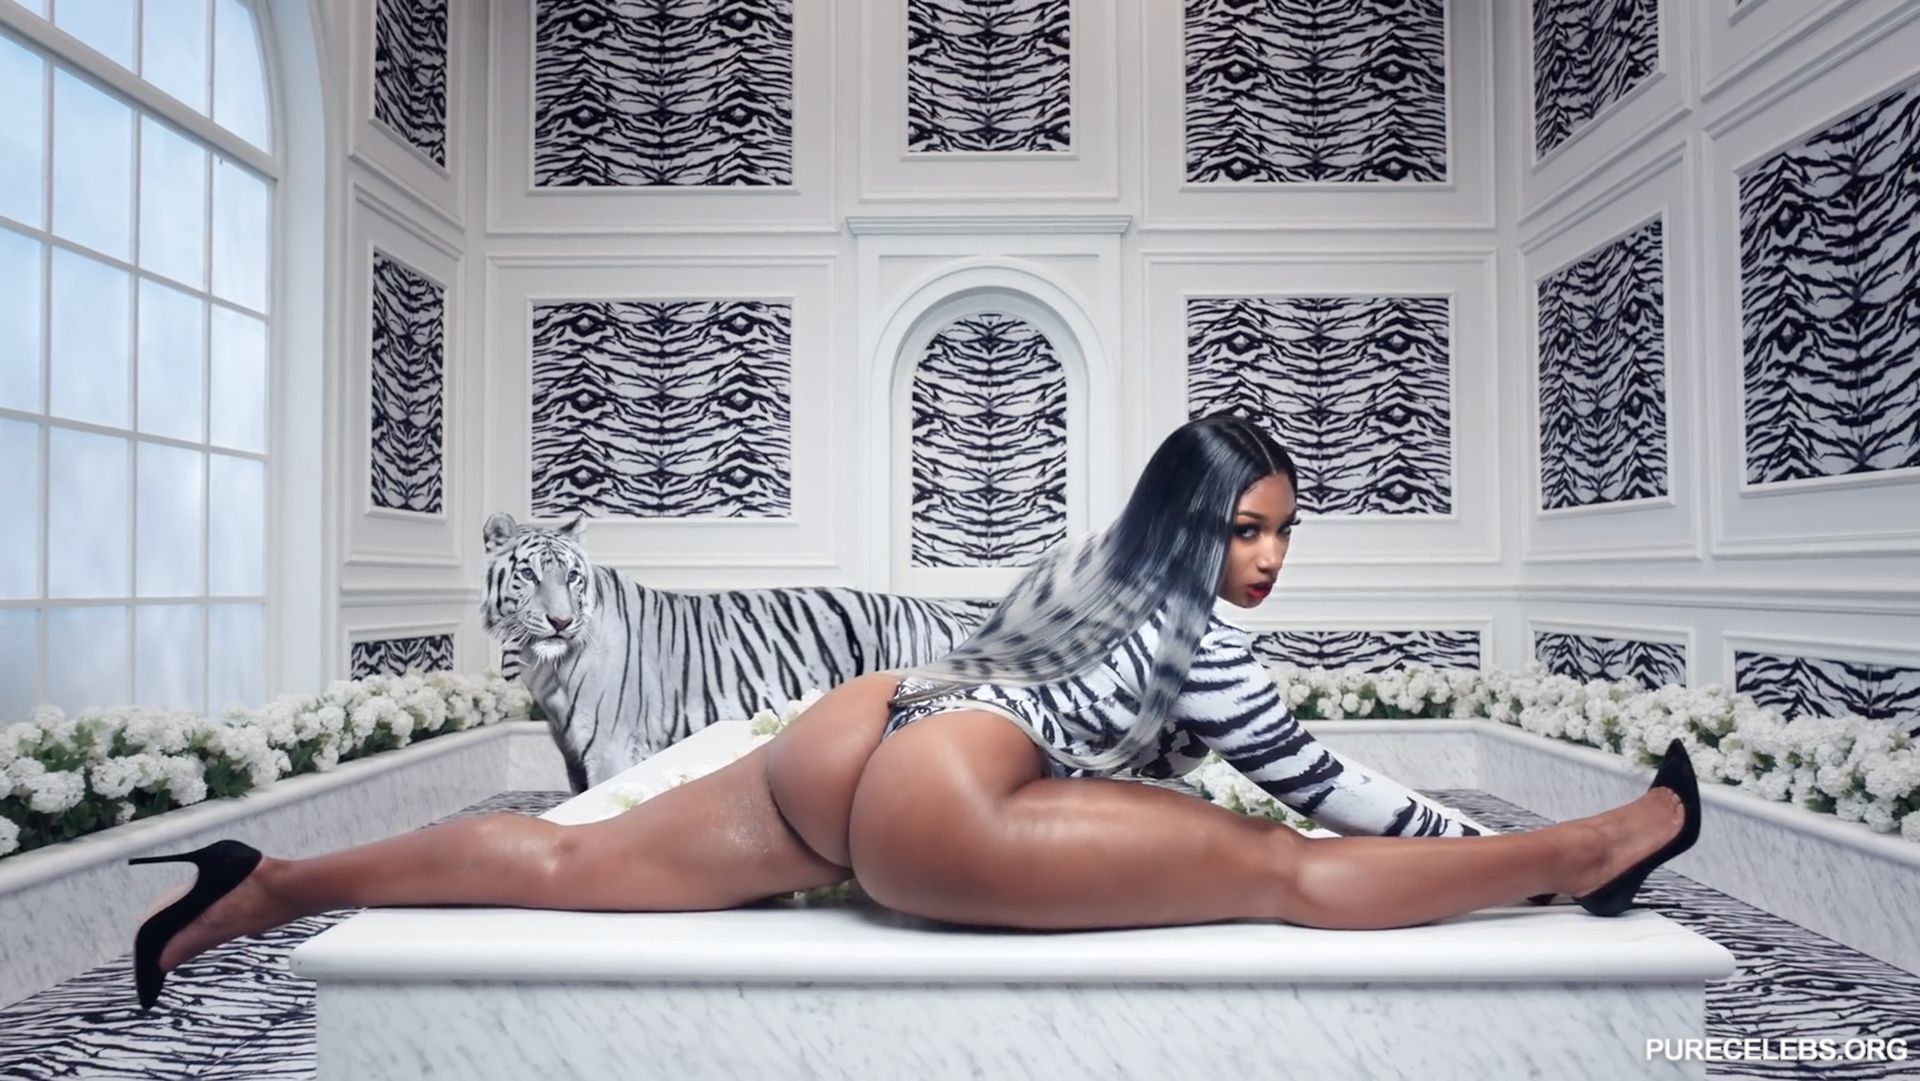 Black Booty Stallion Anal Sex - Cardi B - WAP feat. Megan Big Tits And Booty In Thee Stallion - NuCelebs.com